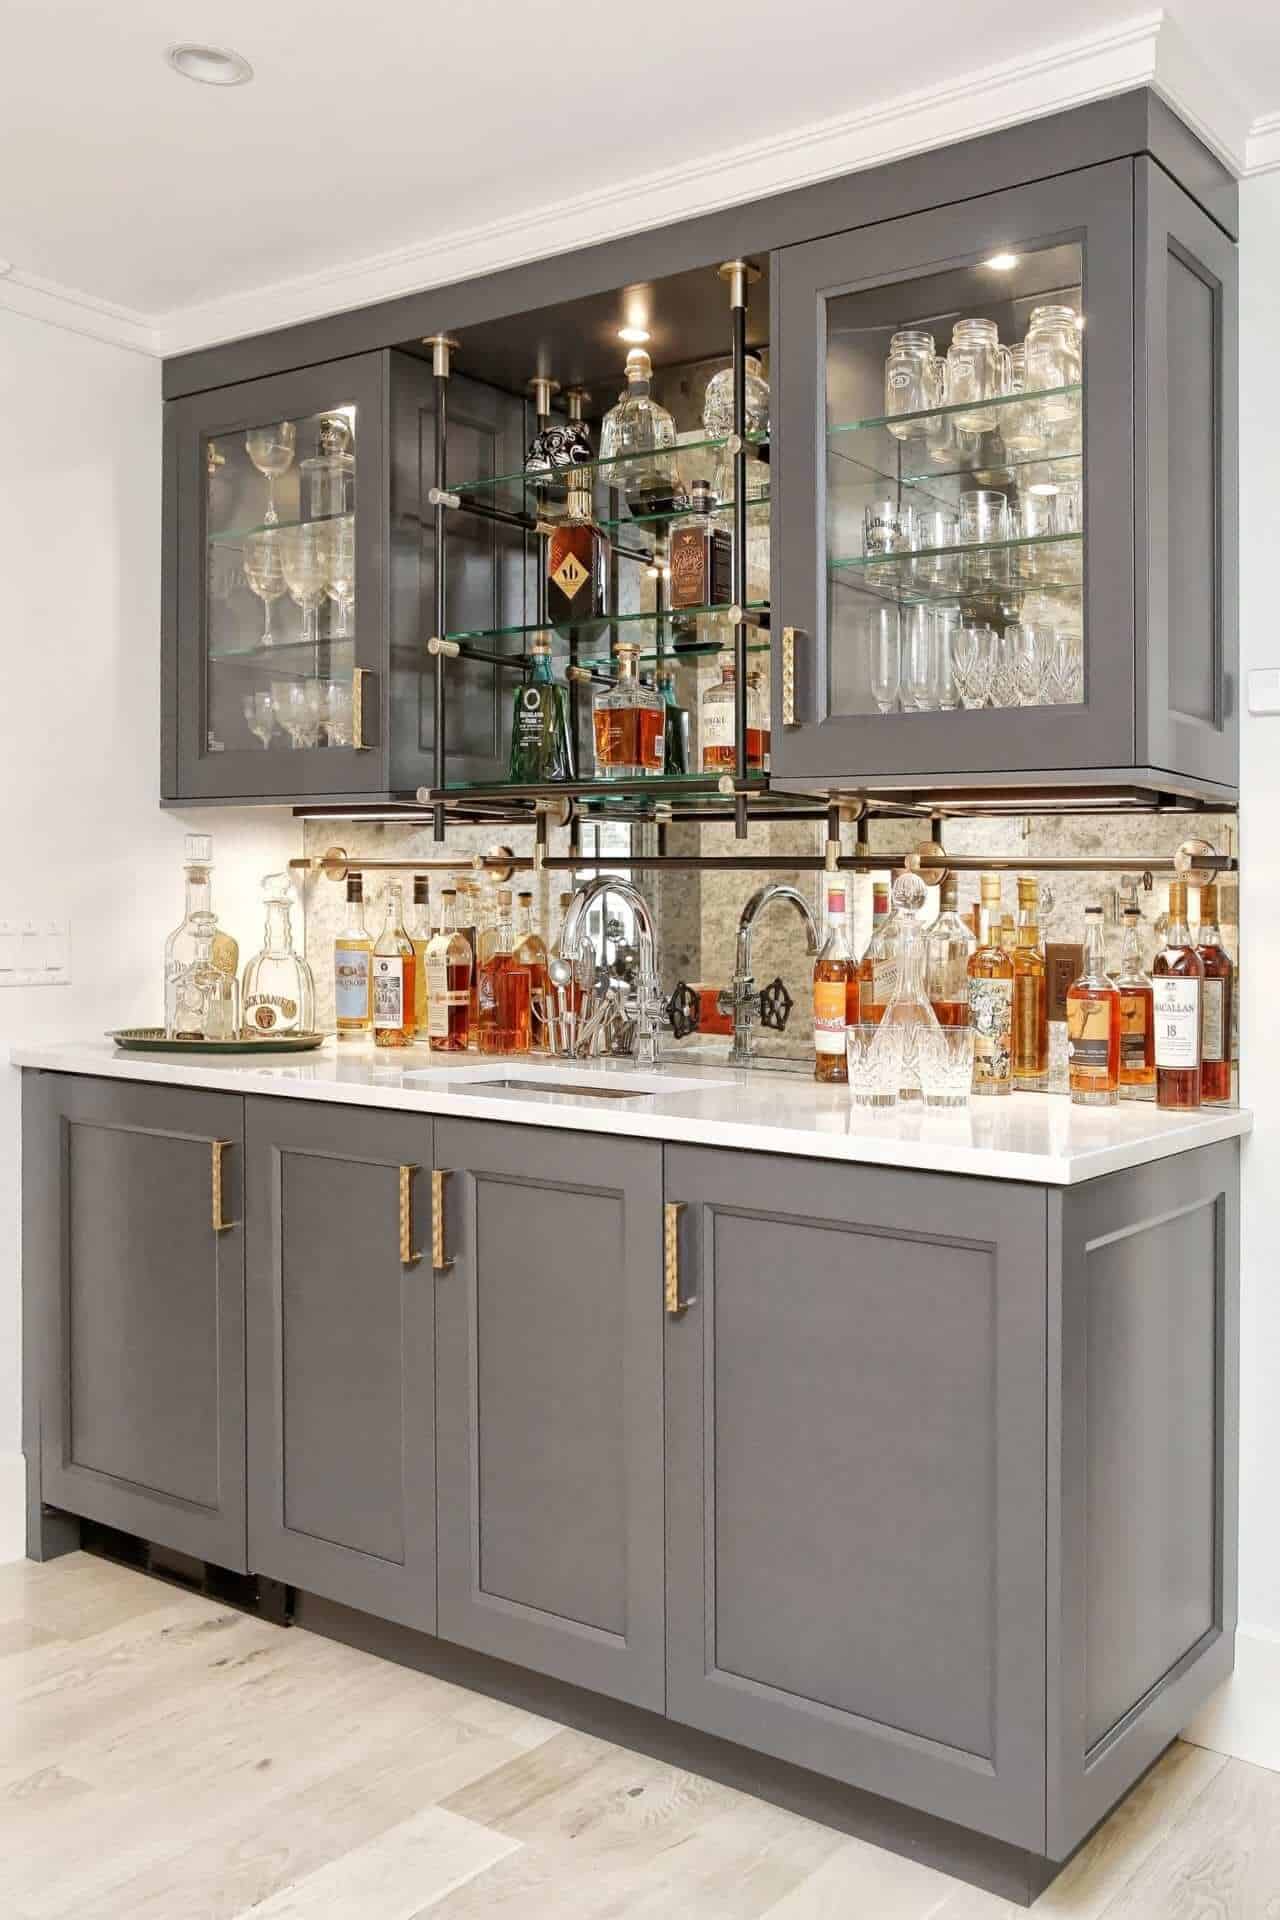 Custom vintage-inspired wet bar features Iron painted NAC cabinetry with brass hardware and antique mirrored backsplash.